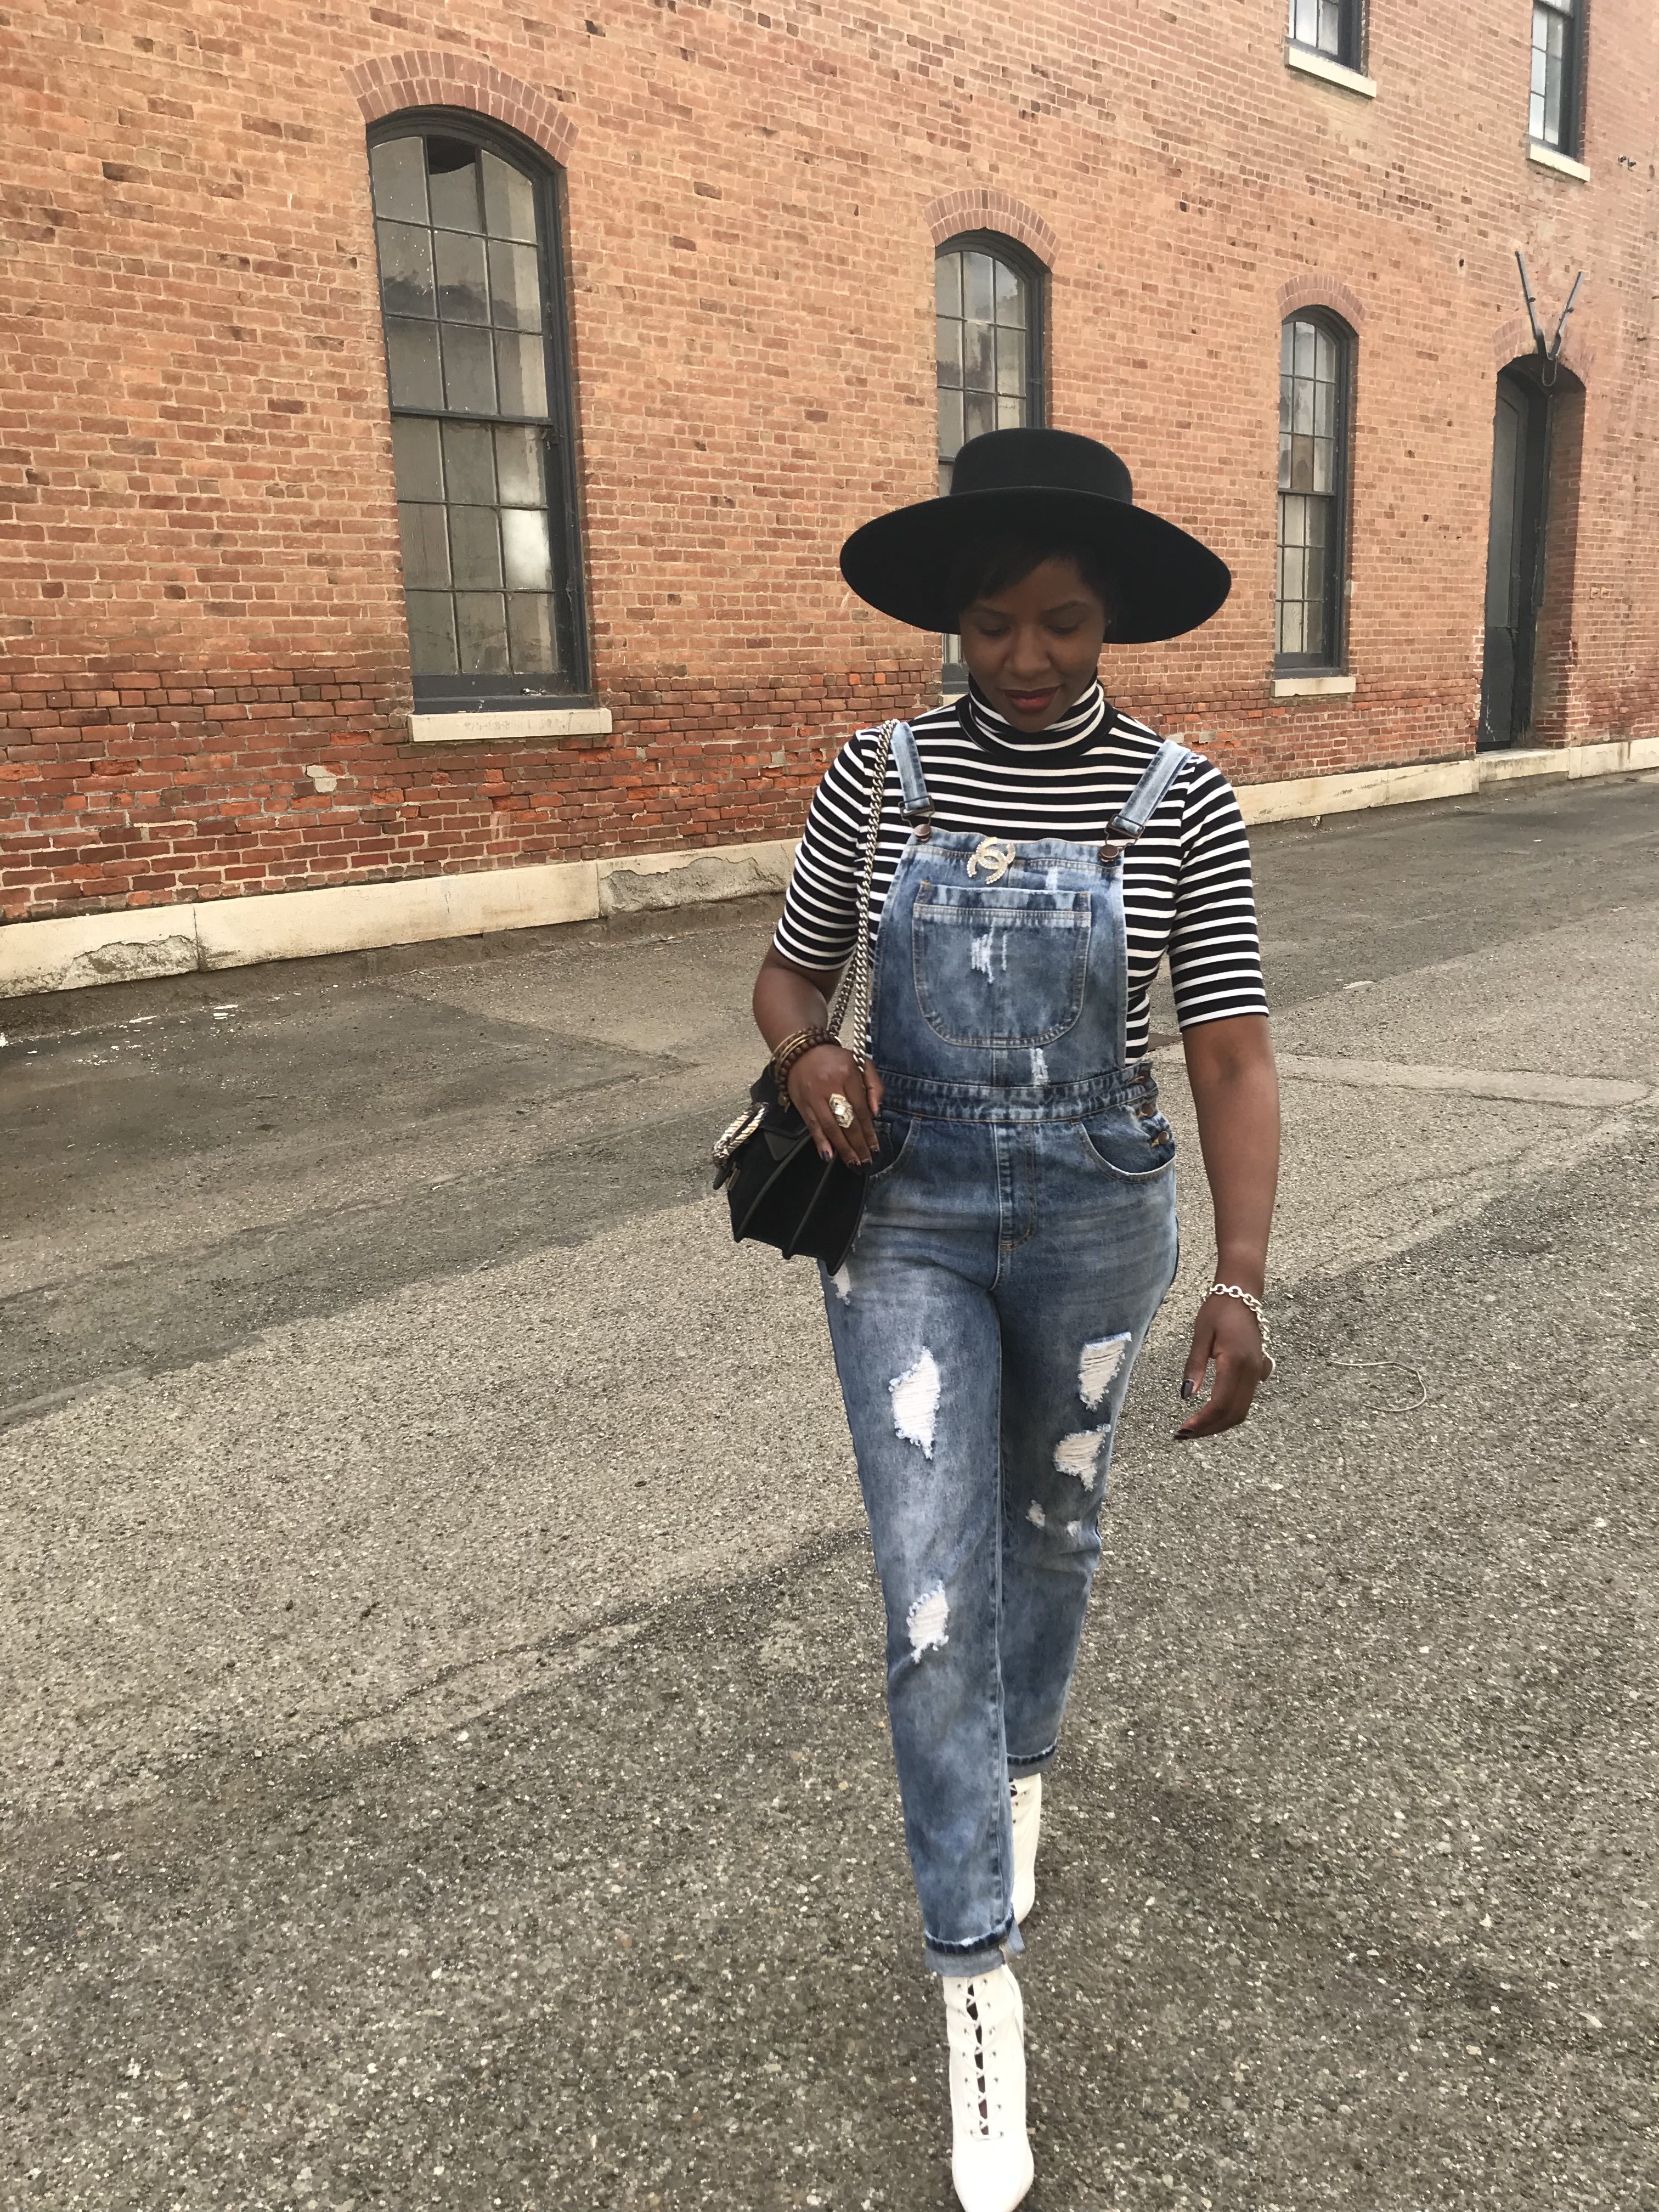 Dorfman Pacific Gaucho Hat Reformation Target Striped Turtleneck Forever 21 Distressed Overalls Chanel Brooch Gucci Dionysus Shoulder Bag Steve Madden White Lace Up Ankle Boots Cocoa Butter Diaries San Francisco Sf Bay Area Fashion Style Blog Blogger